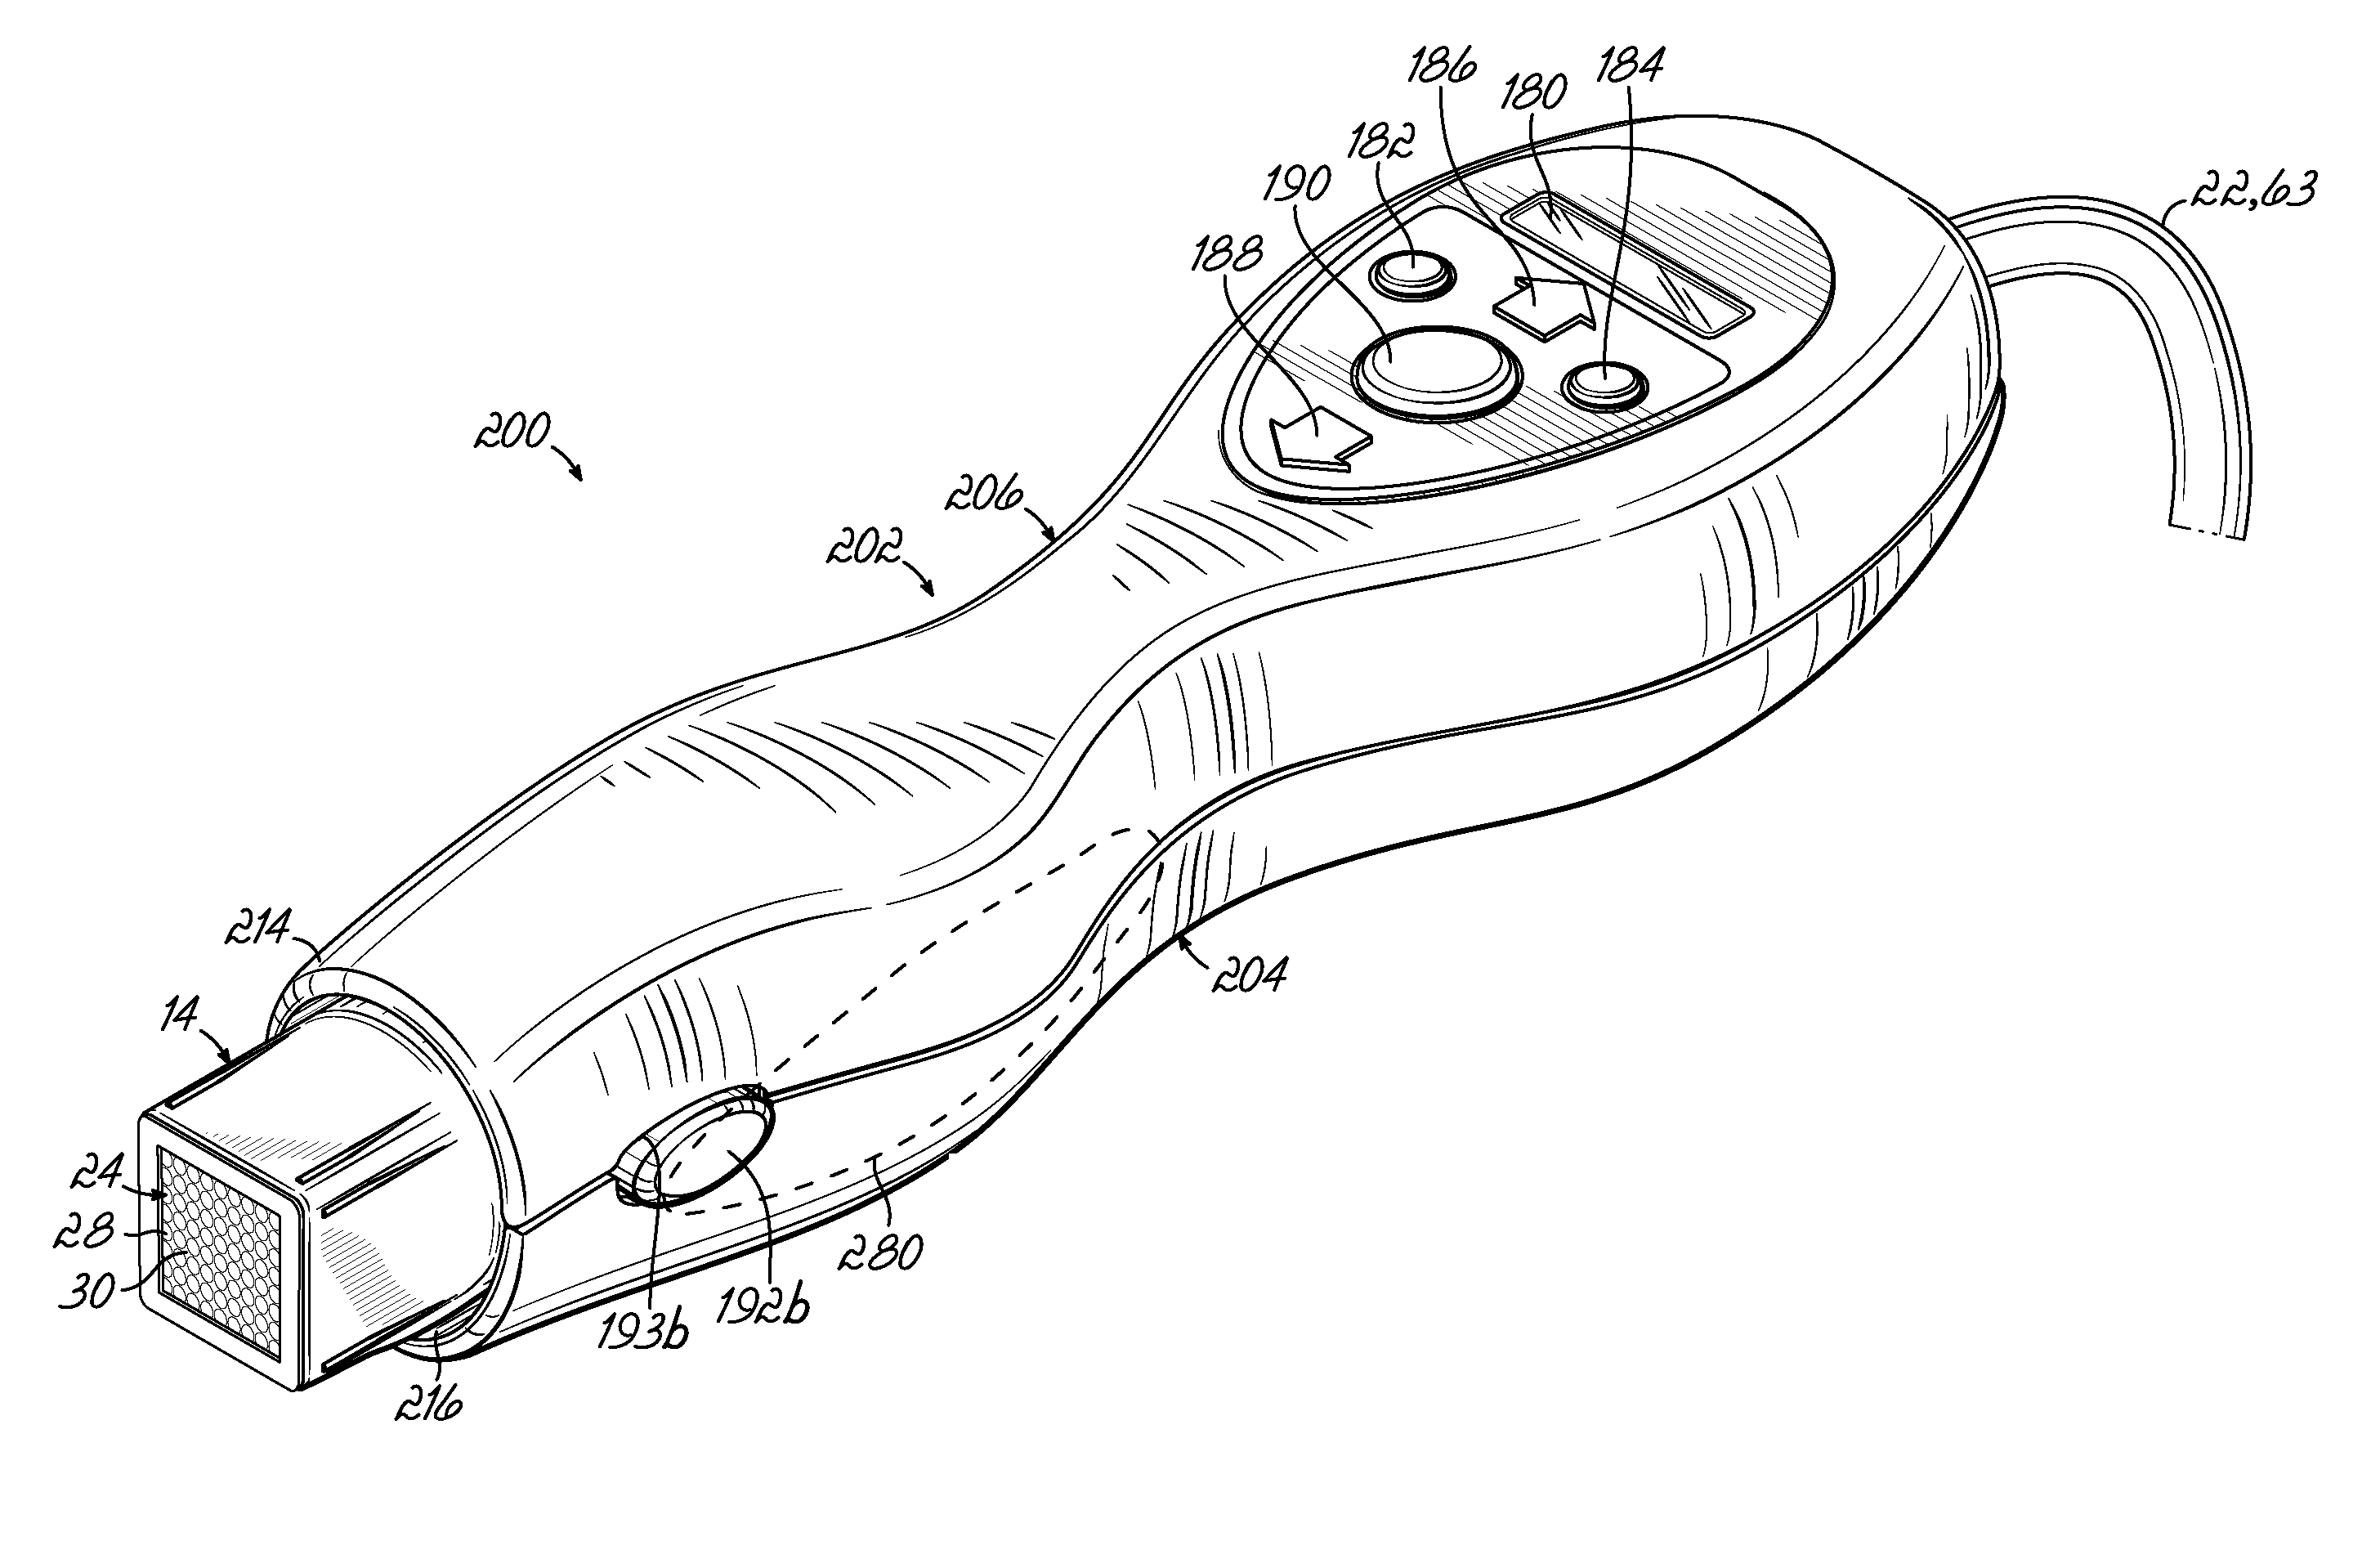 Tissue treatment apparatus with functional mechanical stimulation and methods for reducing pain during tissue treatments